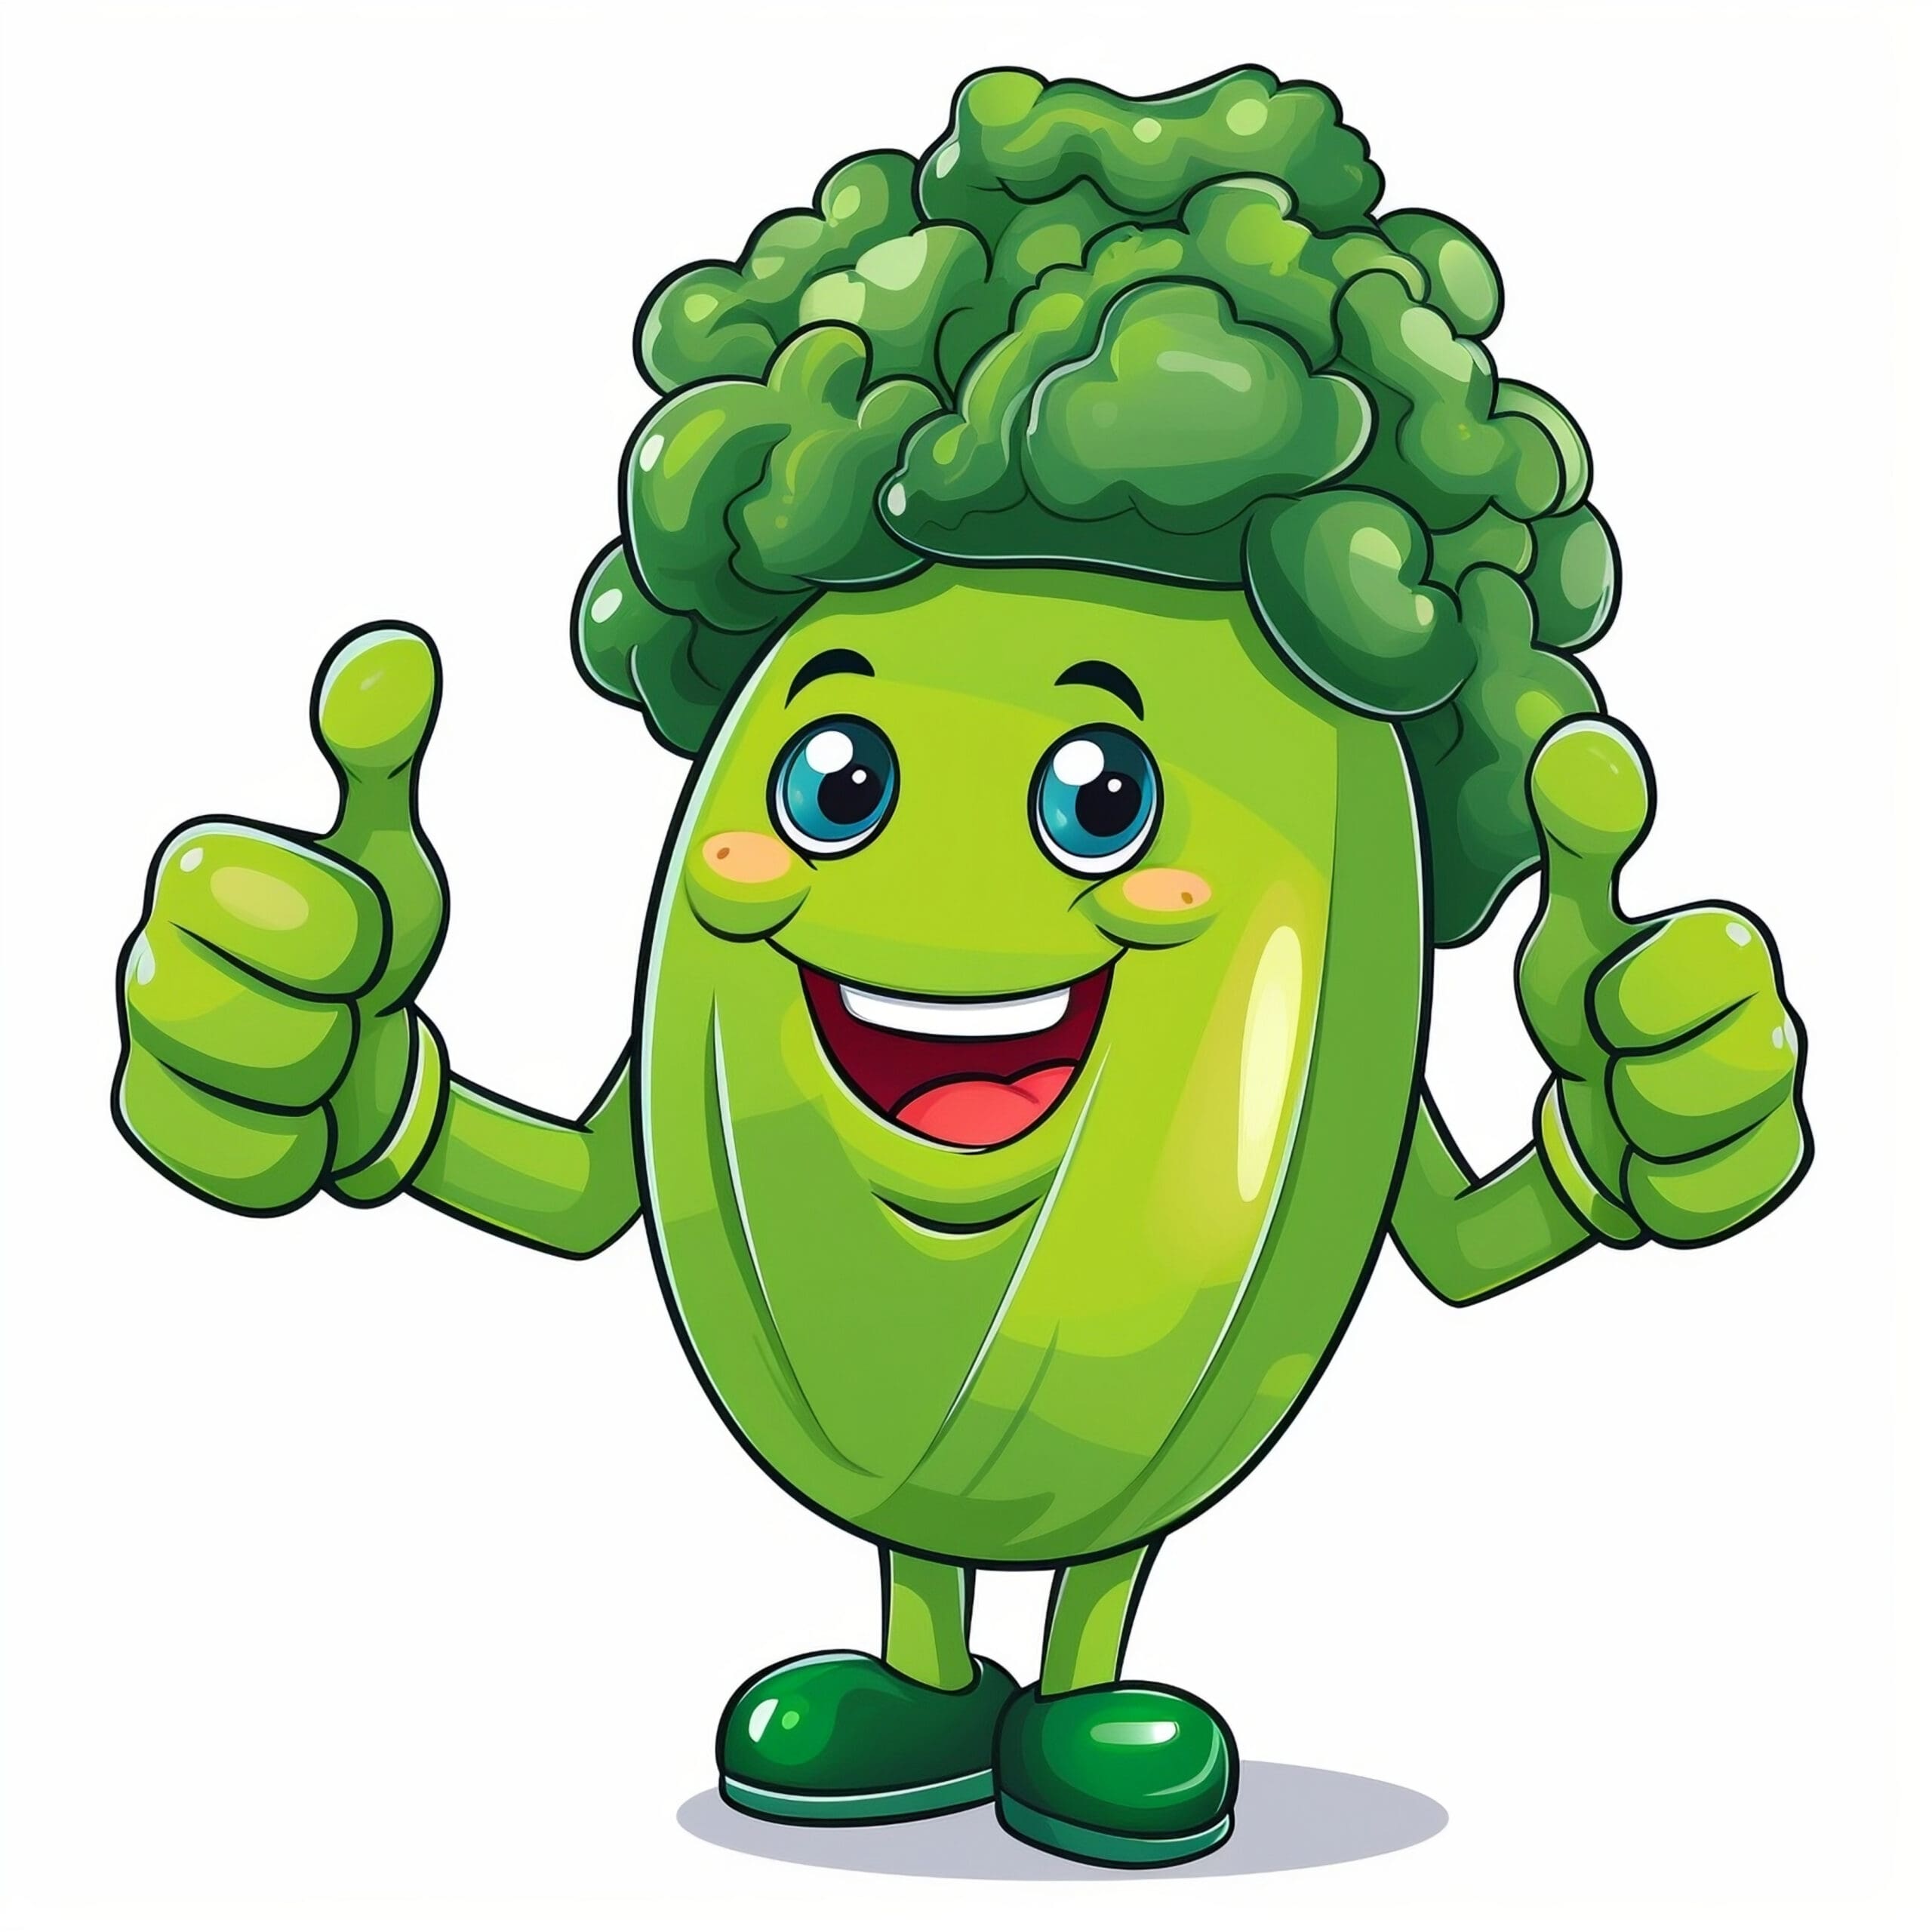 Cartoon graphic of a satisfied kale leaf with sunglasses waving goodbye on a colorful background.